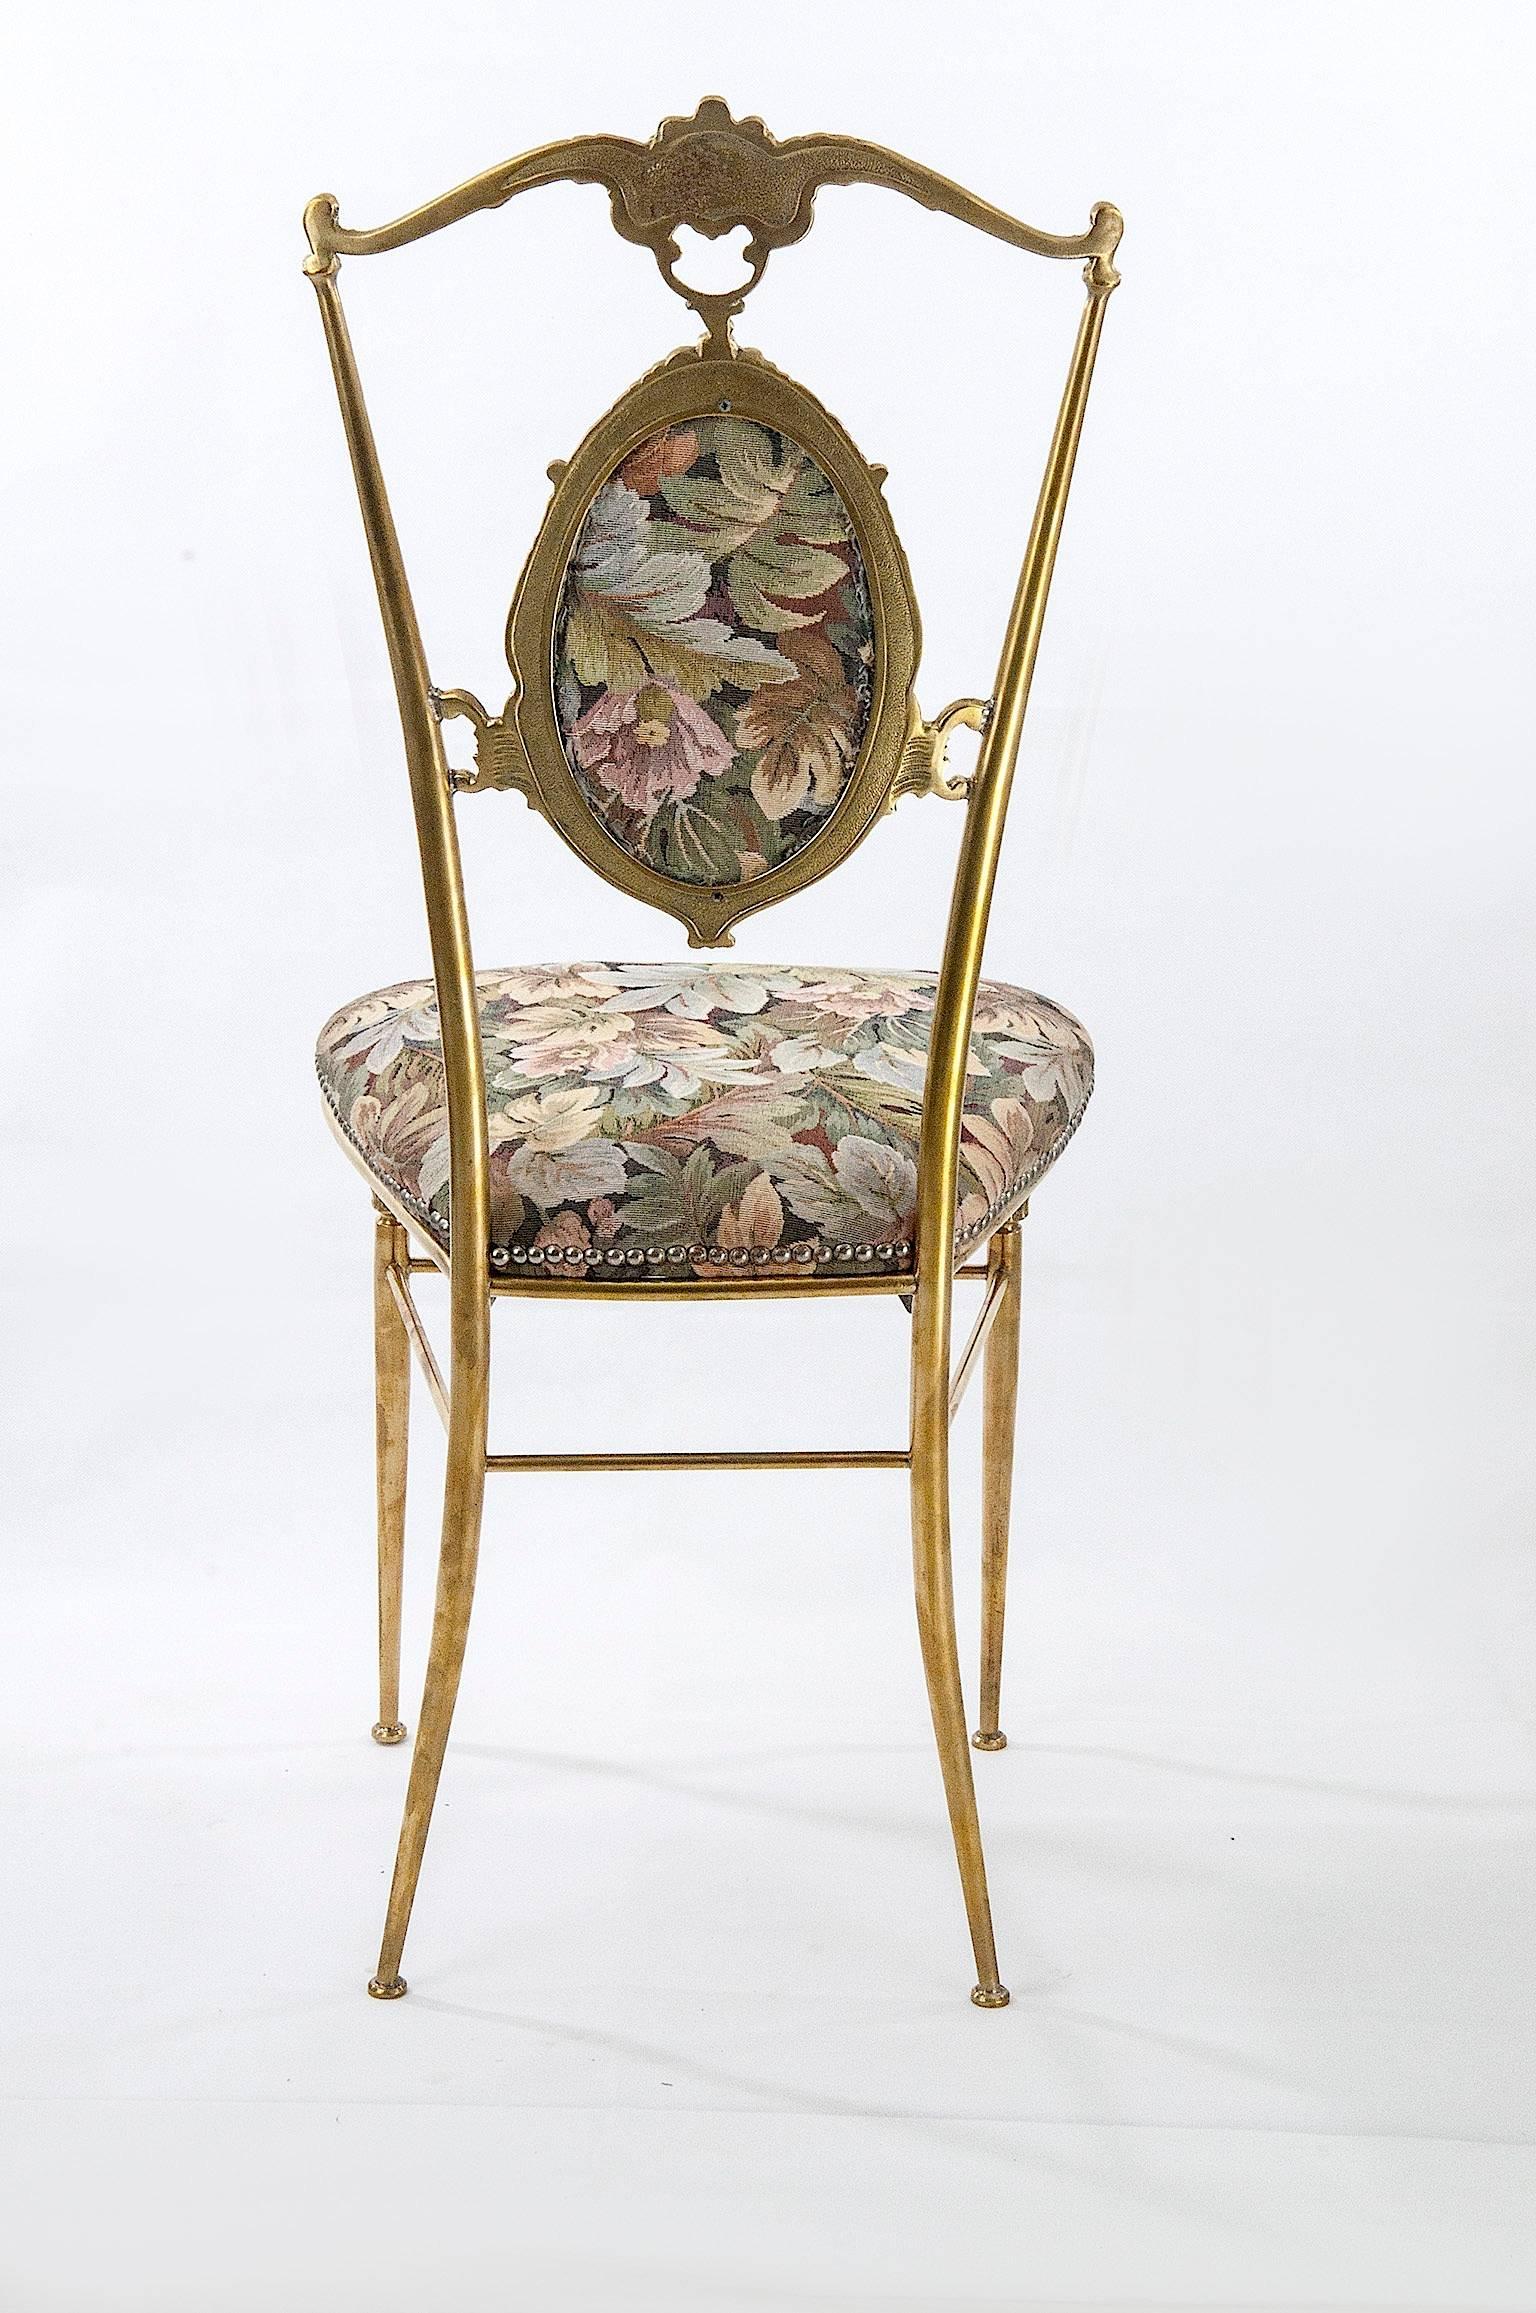 Rococo Revival Exceptional Italian 1950 Vintage Pair of Chairs in the Style of Chiavari